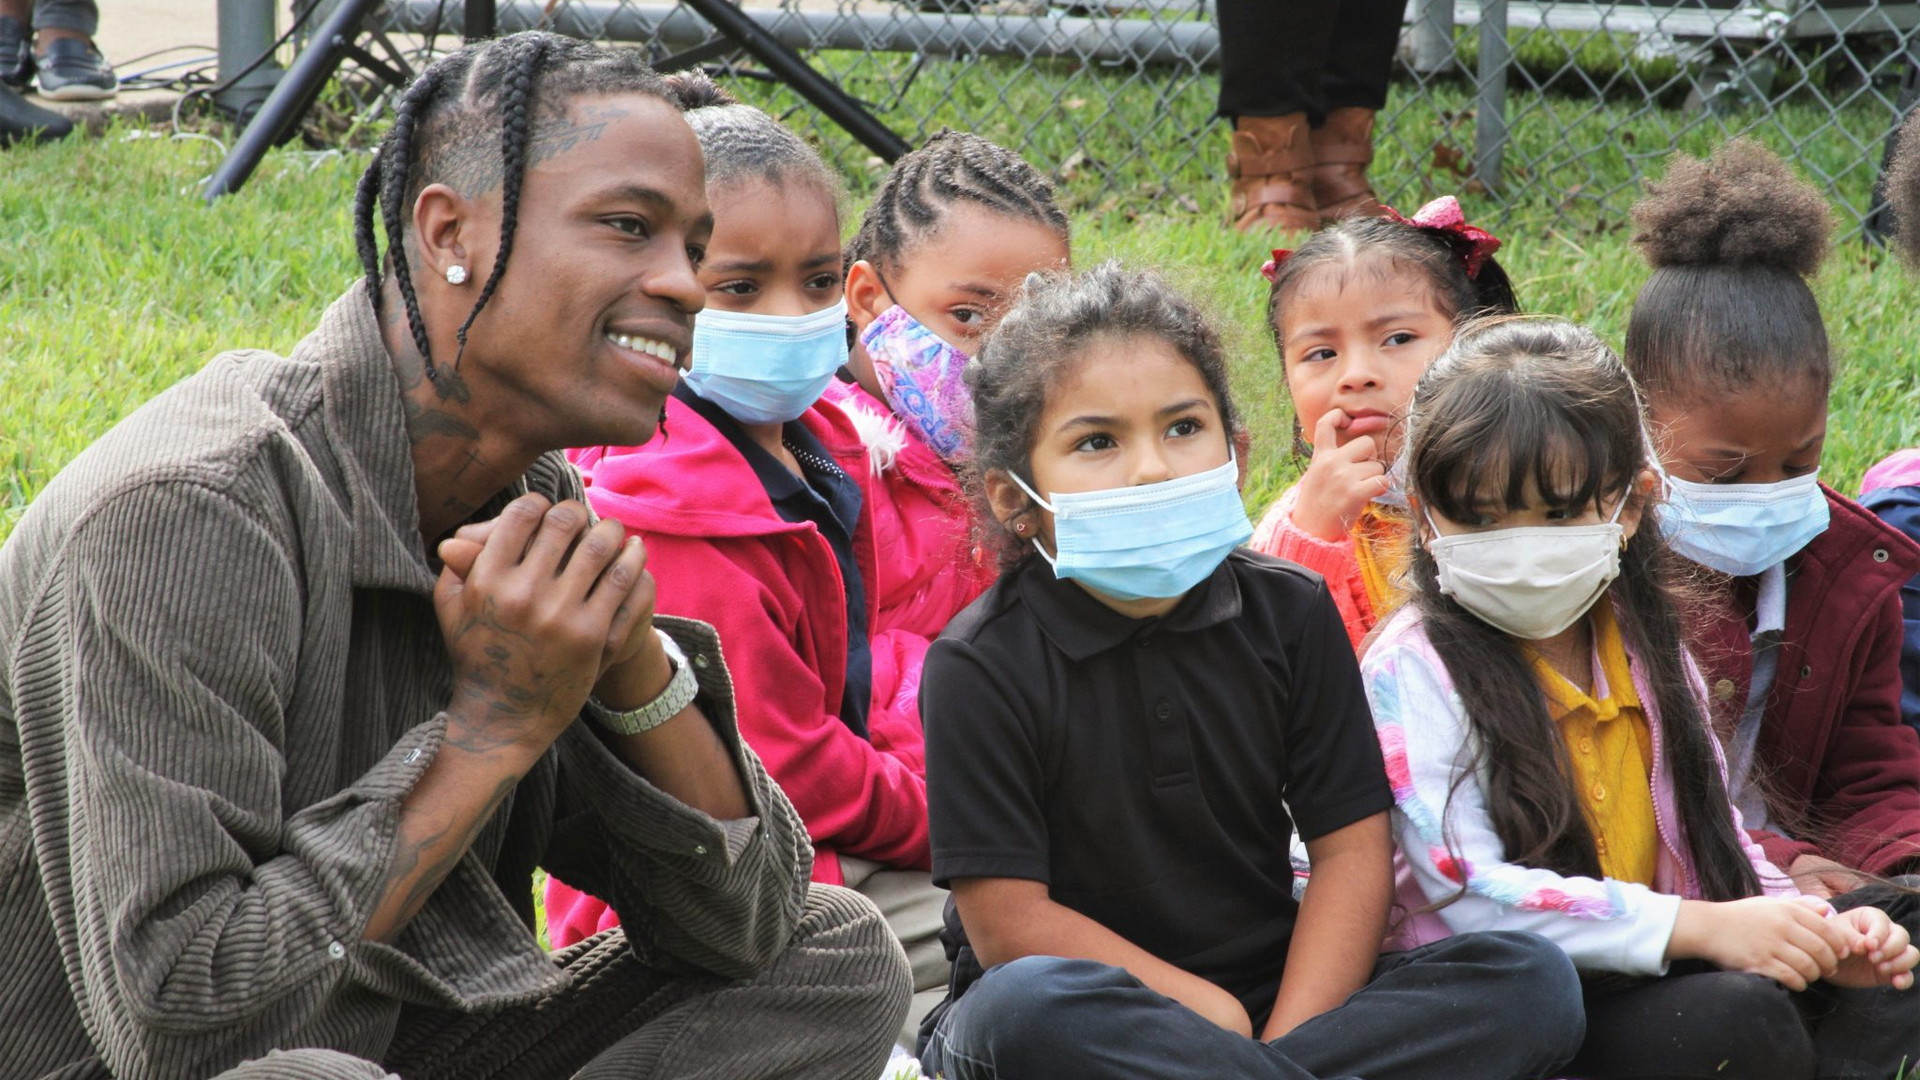 Travis Scott Opens Cactus Jack Gardens To Help Kids Learn Agricultural, Economics & Nutritional Skills